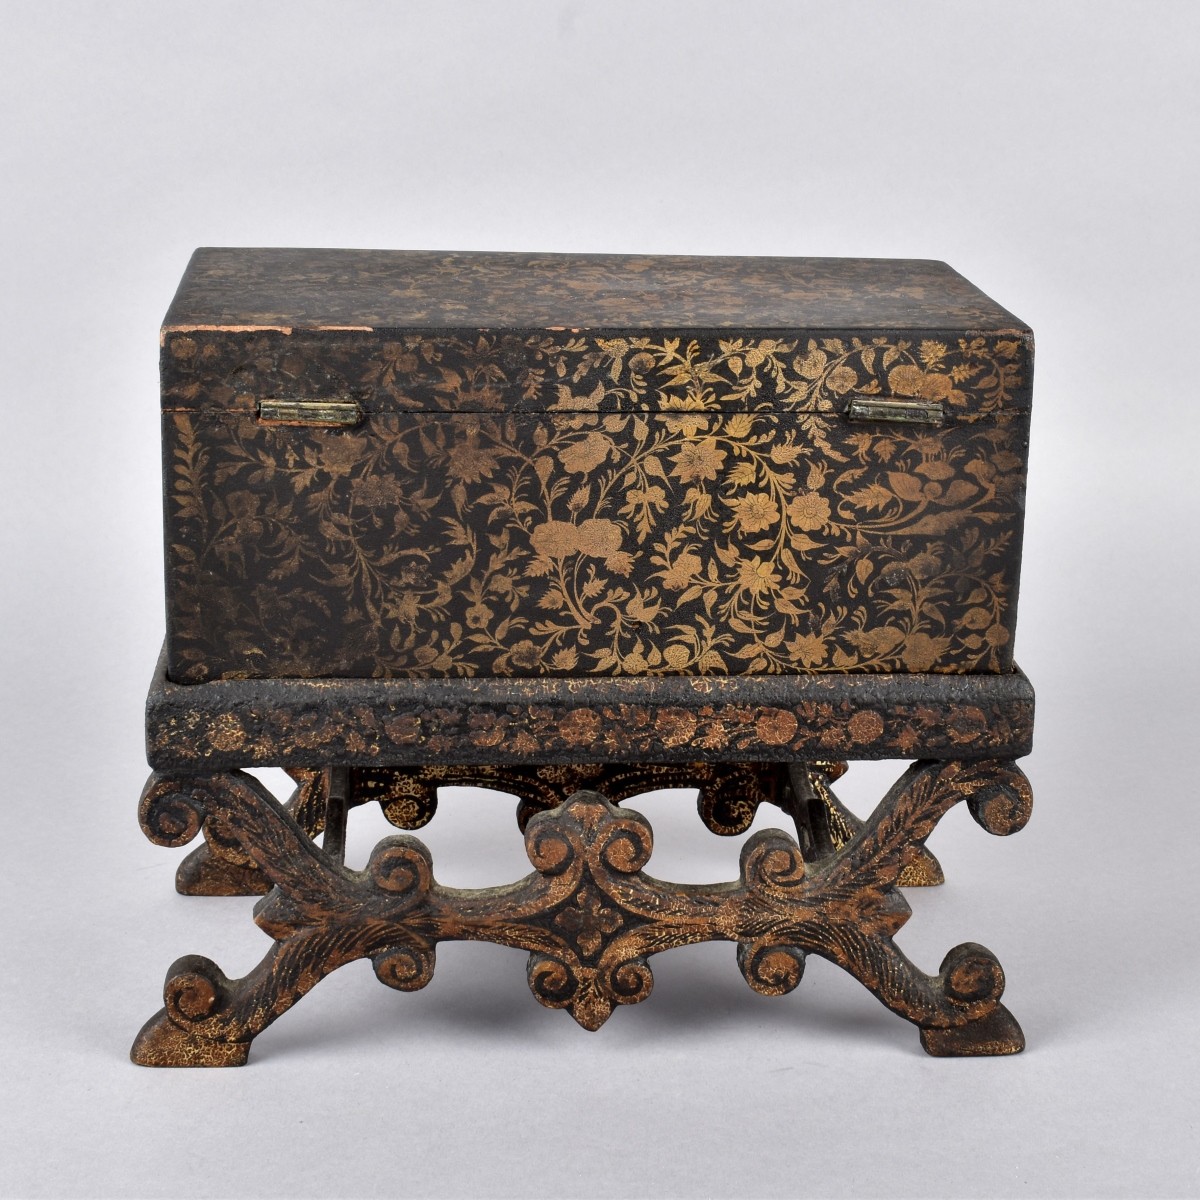 Gilt Painted Box with Associated Stand